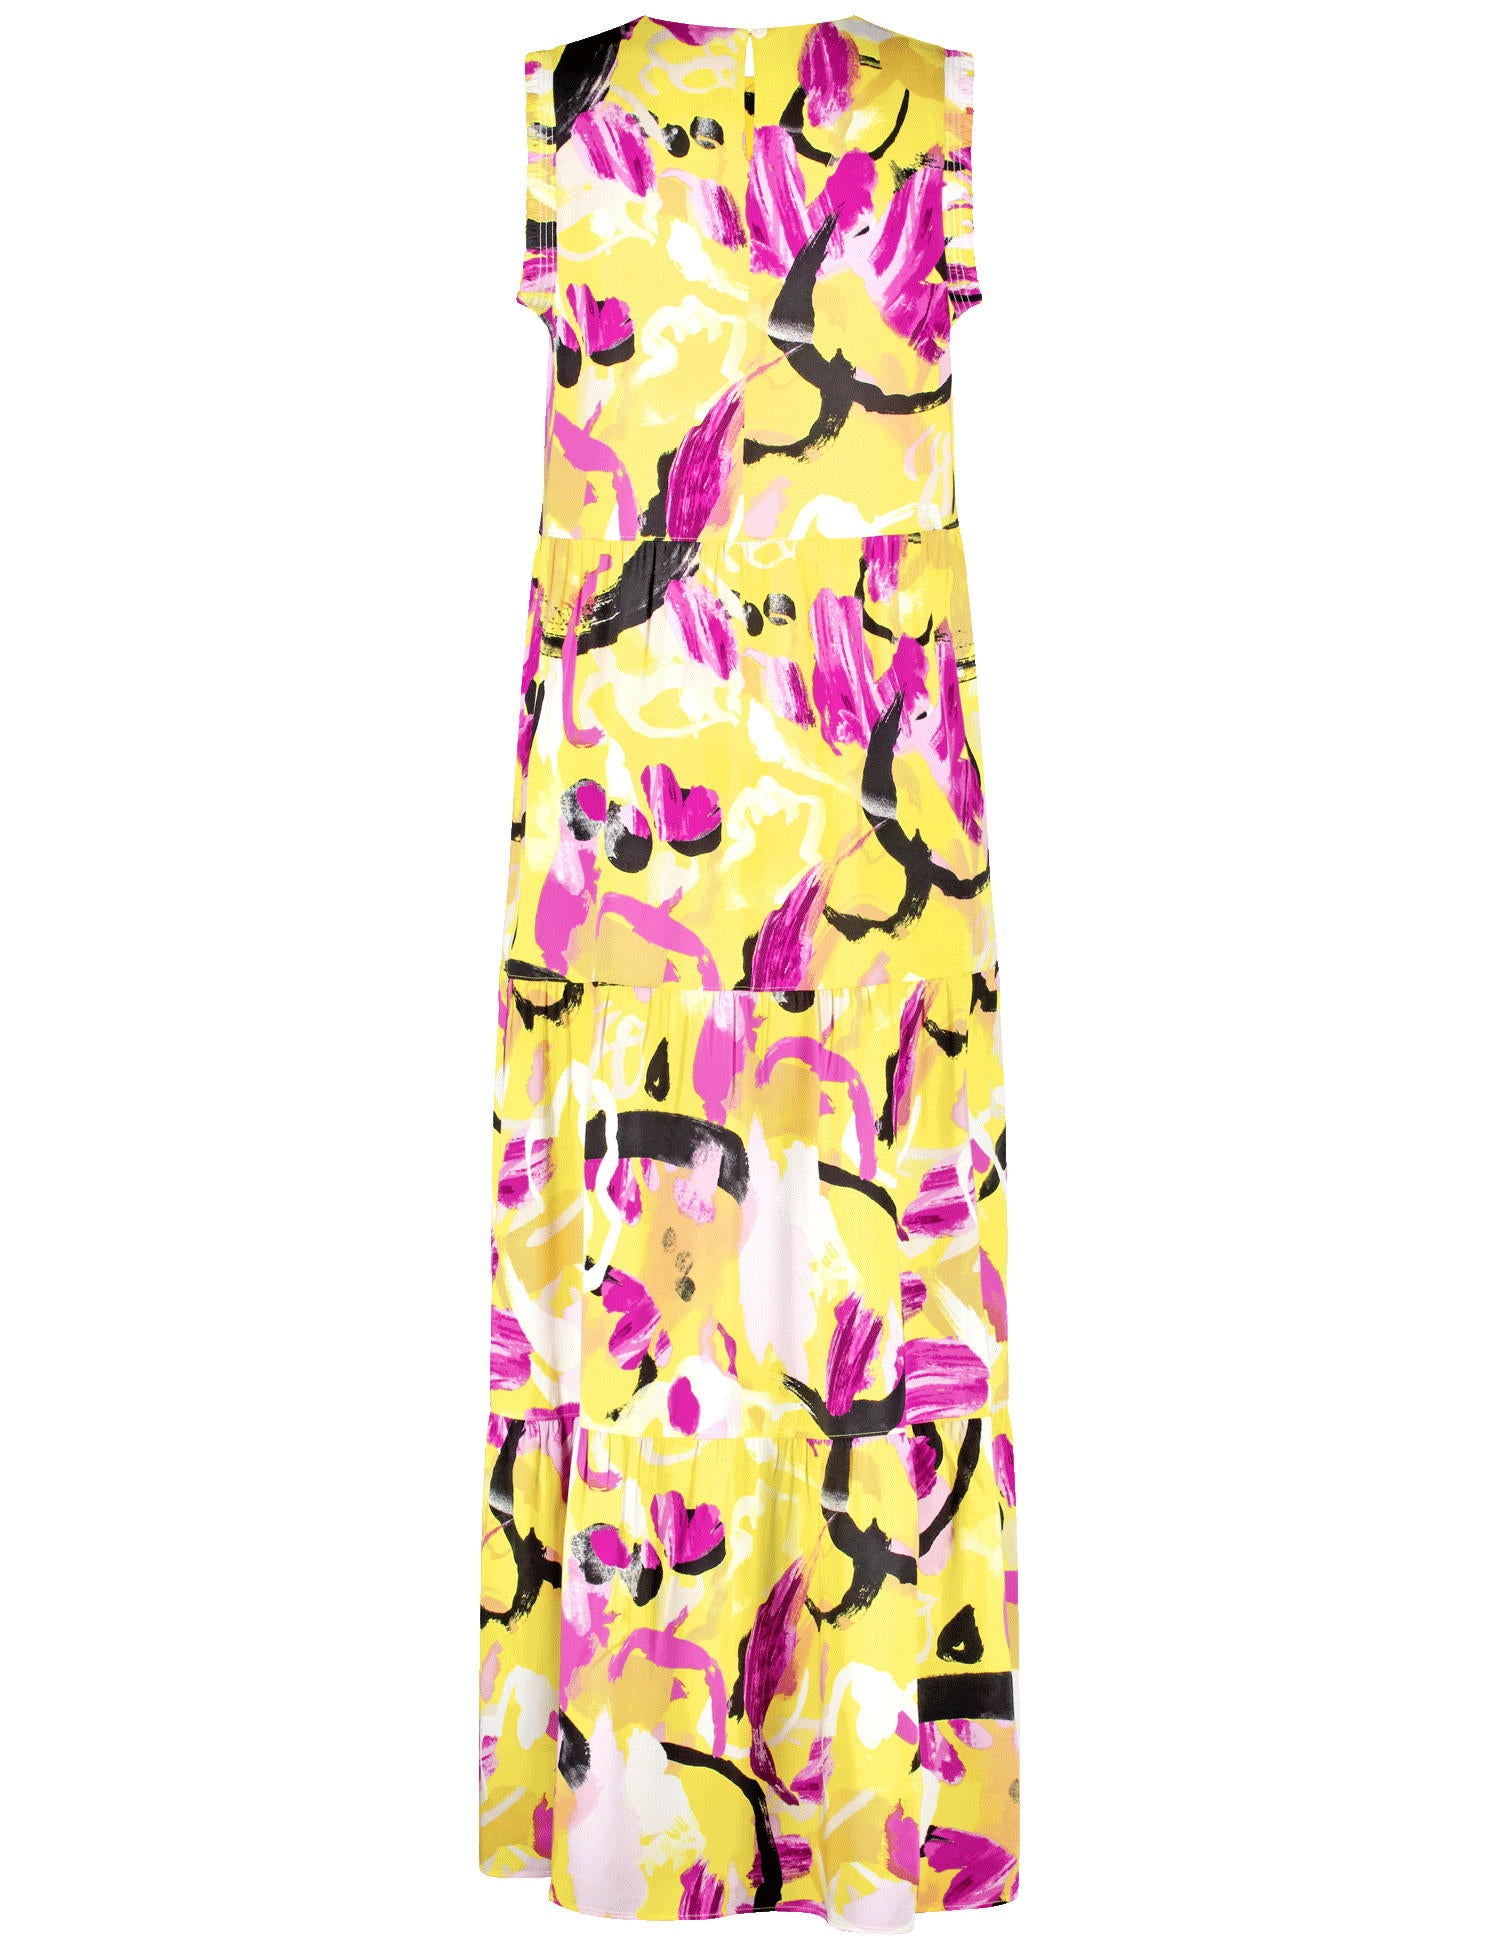 Sleeveless Maxi Dress With A Floral Print_580310-11019_4142_03